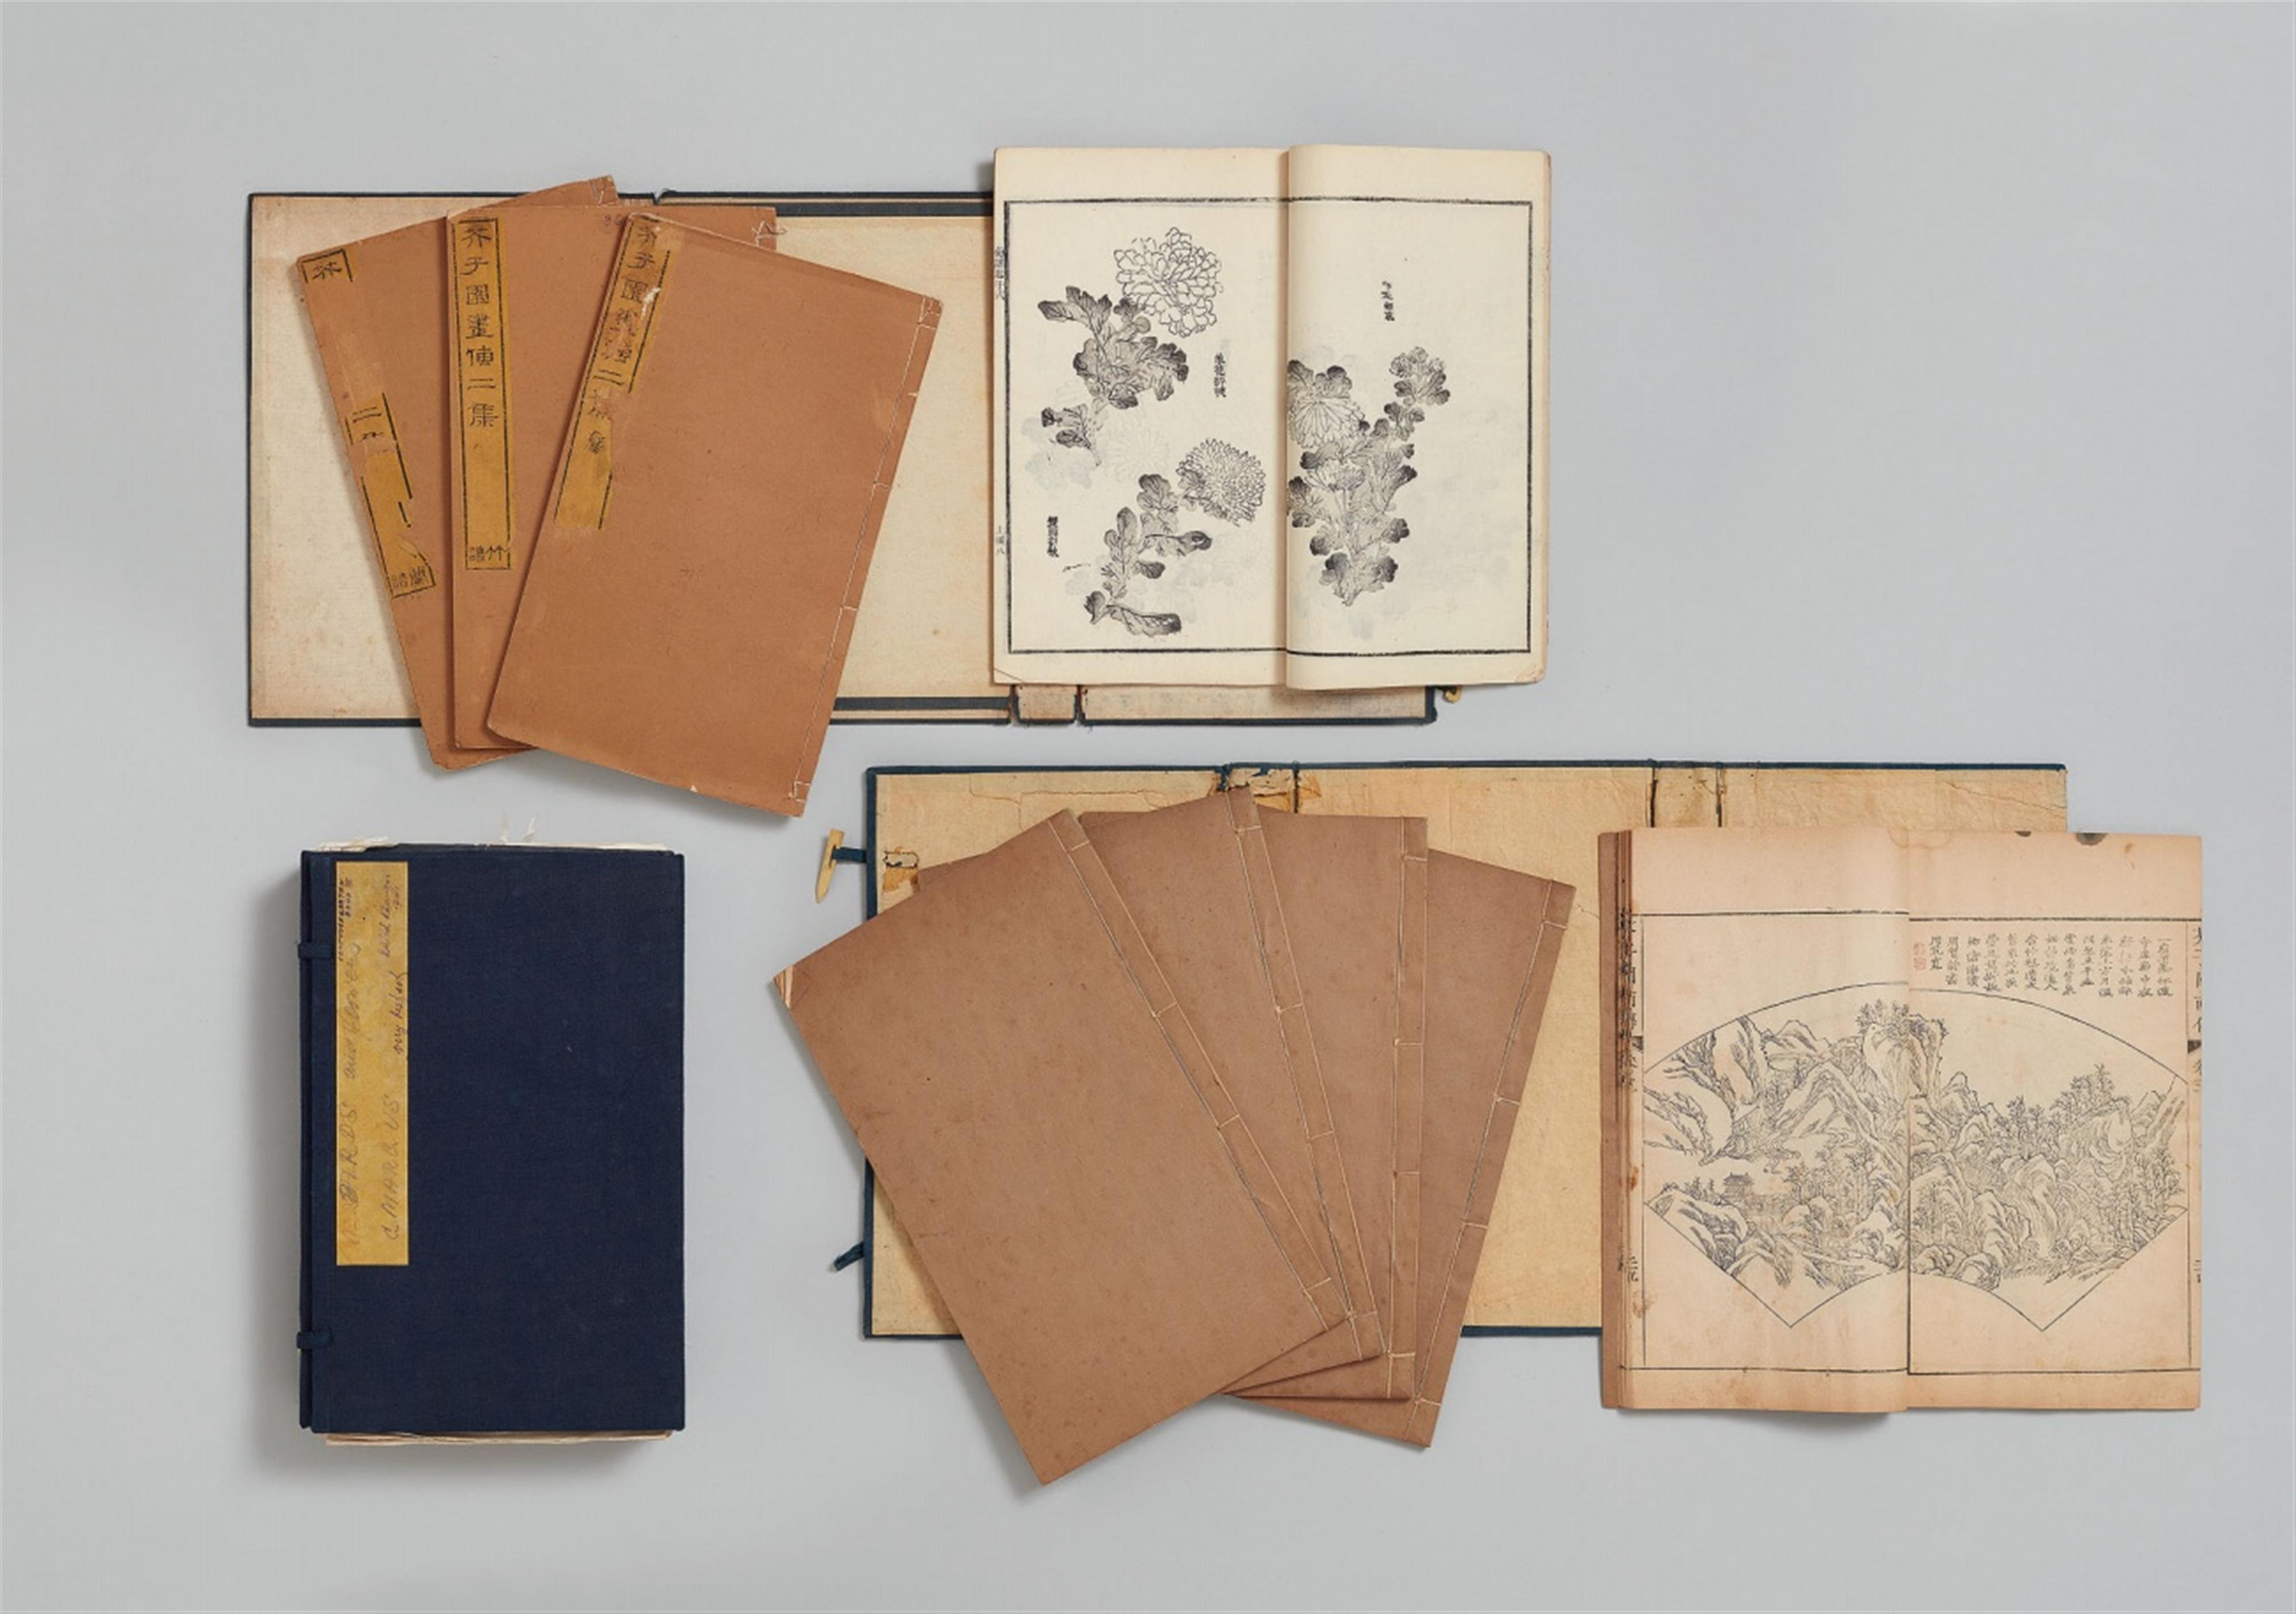 Various artists - Album sets from The Mustard Seed Garden painting manual (Jiezi yuan huazhuan erji). a) and b) Four volumes. c) Five volumes. From various editions and artists. Qing dynasty. (3) - image-1